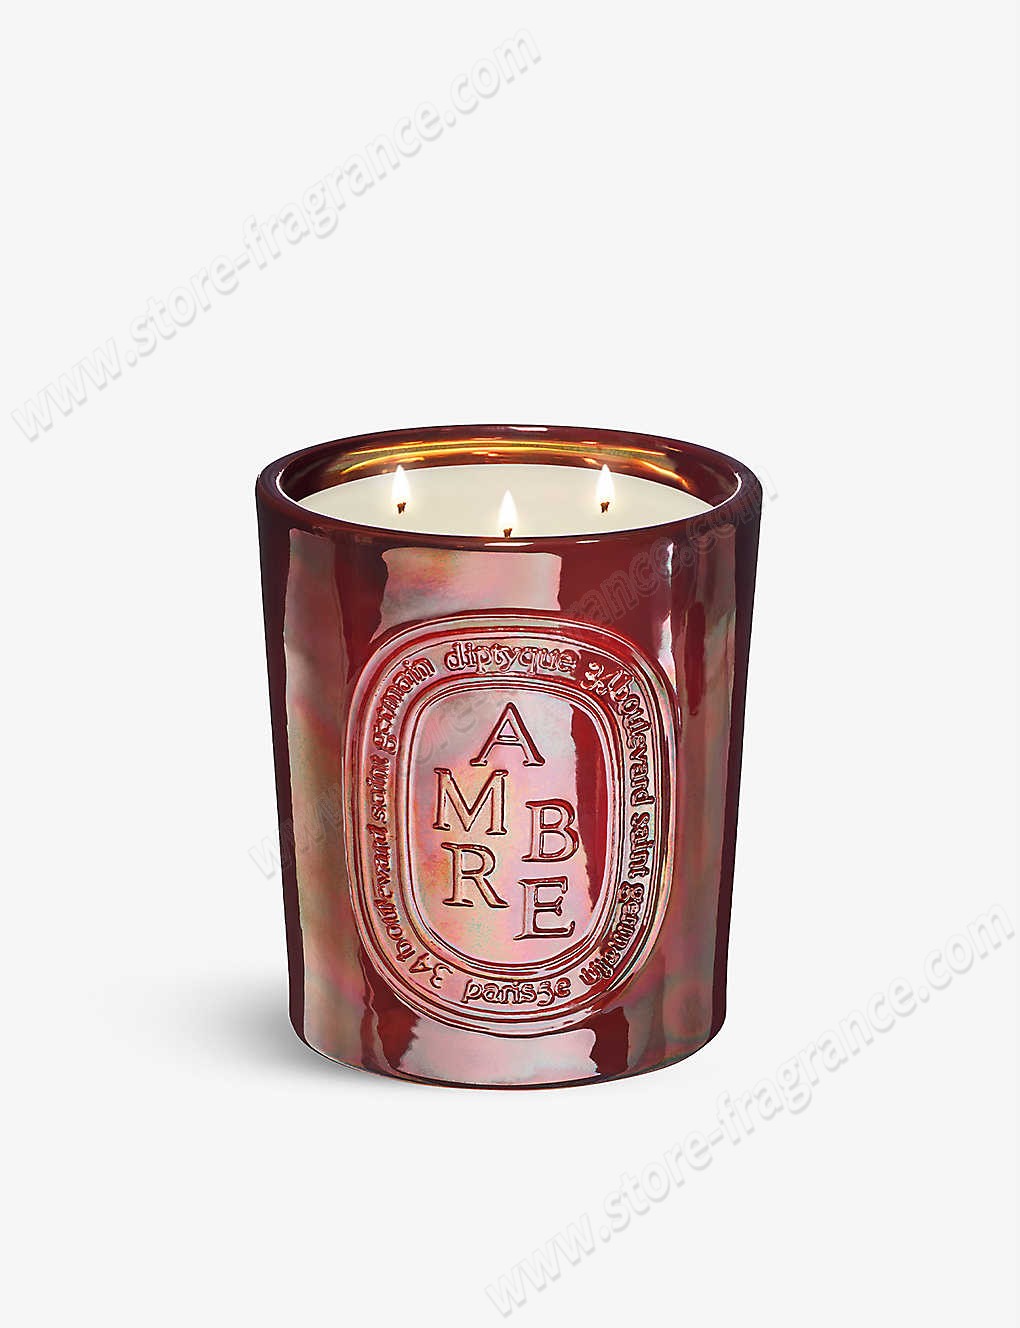 DIPTYQUE/Ambre limited-edition giant scented candle 1.5kg ✿ Discount Store - DIPTYQUE/Ambre limited-edition giant scented candle 1.5kg ✿ Discount Store